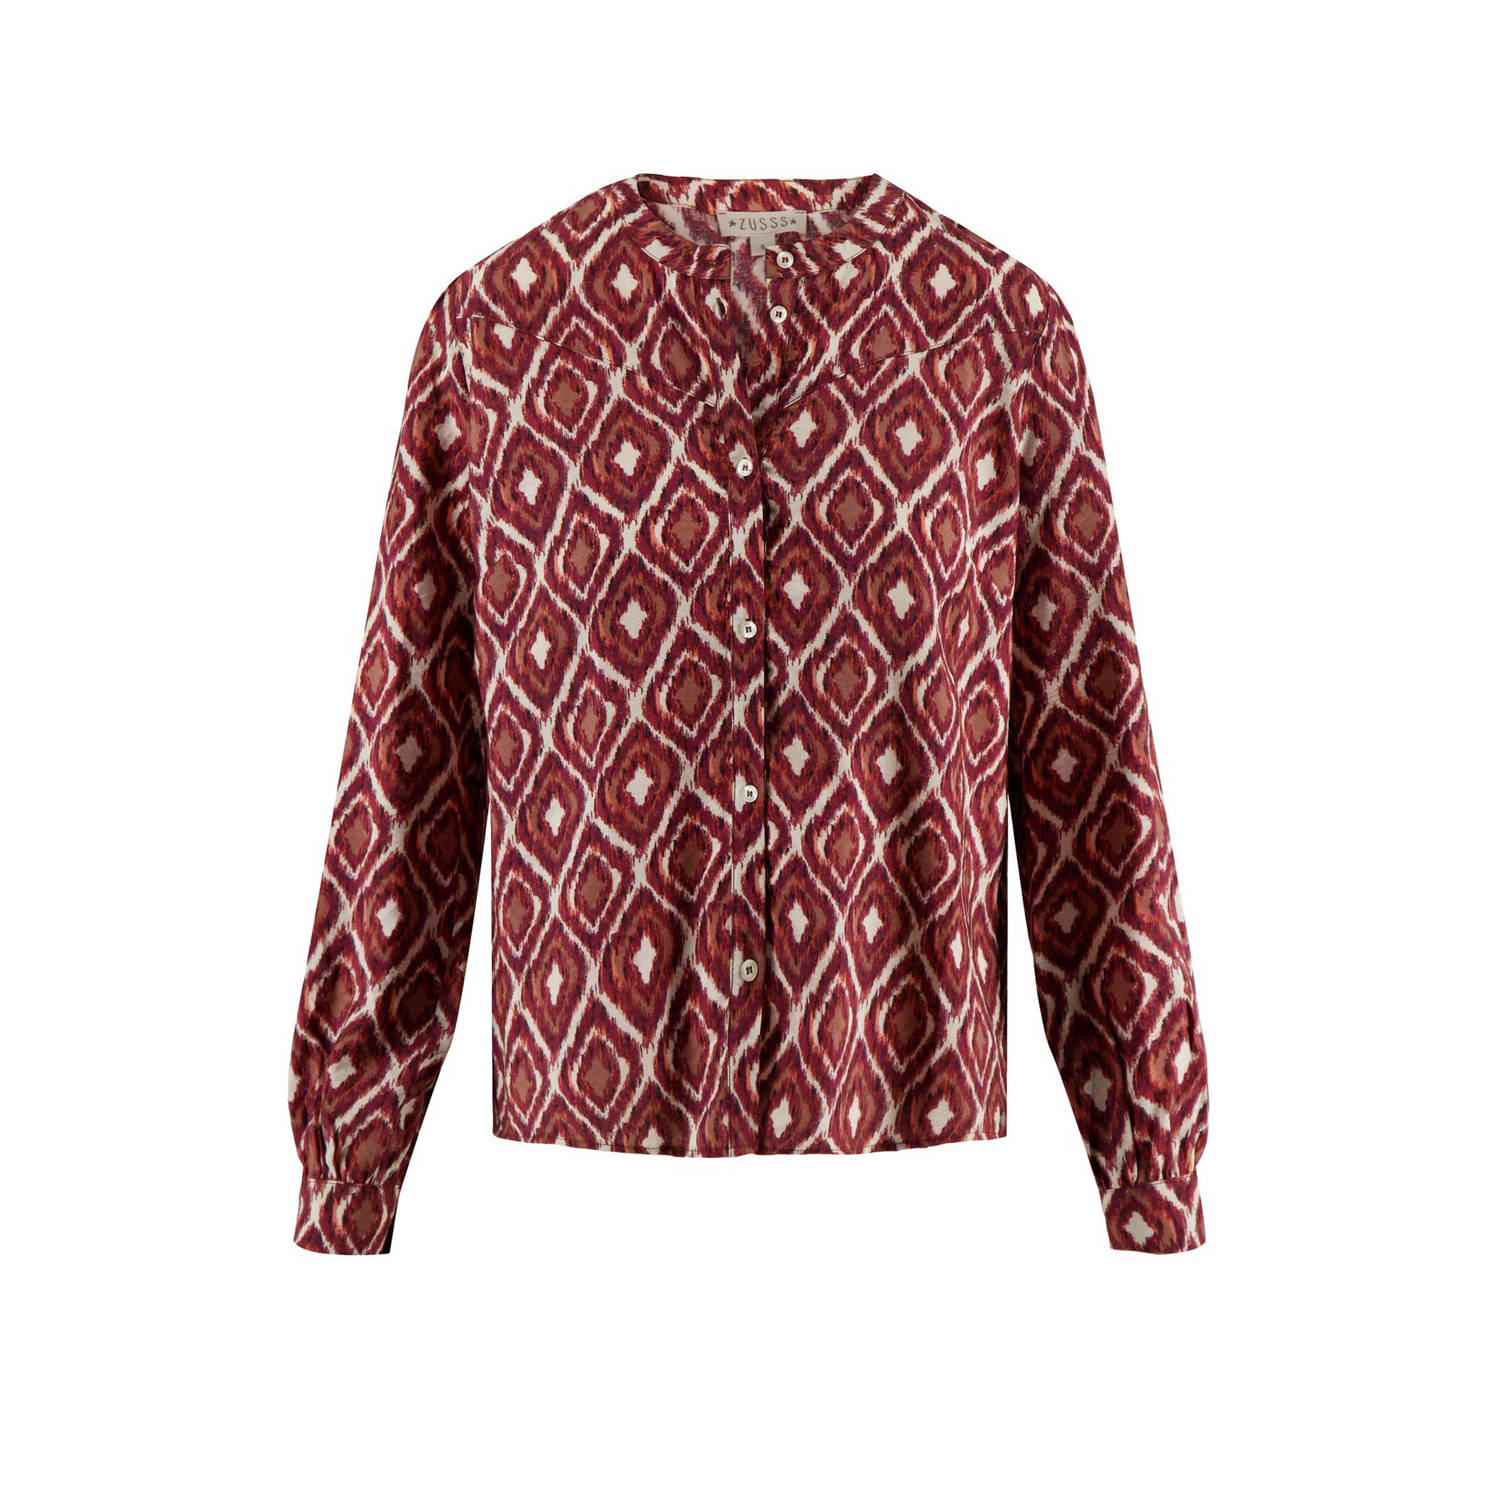 Zusss blouse met all over print zand roodbruin